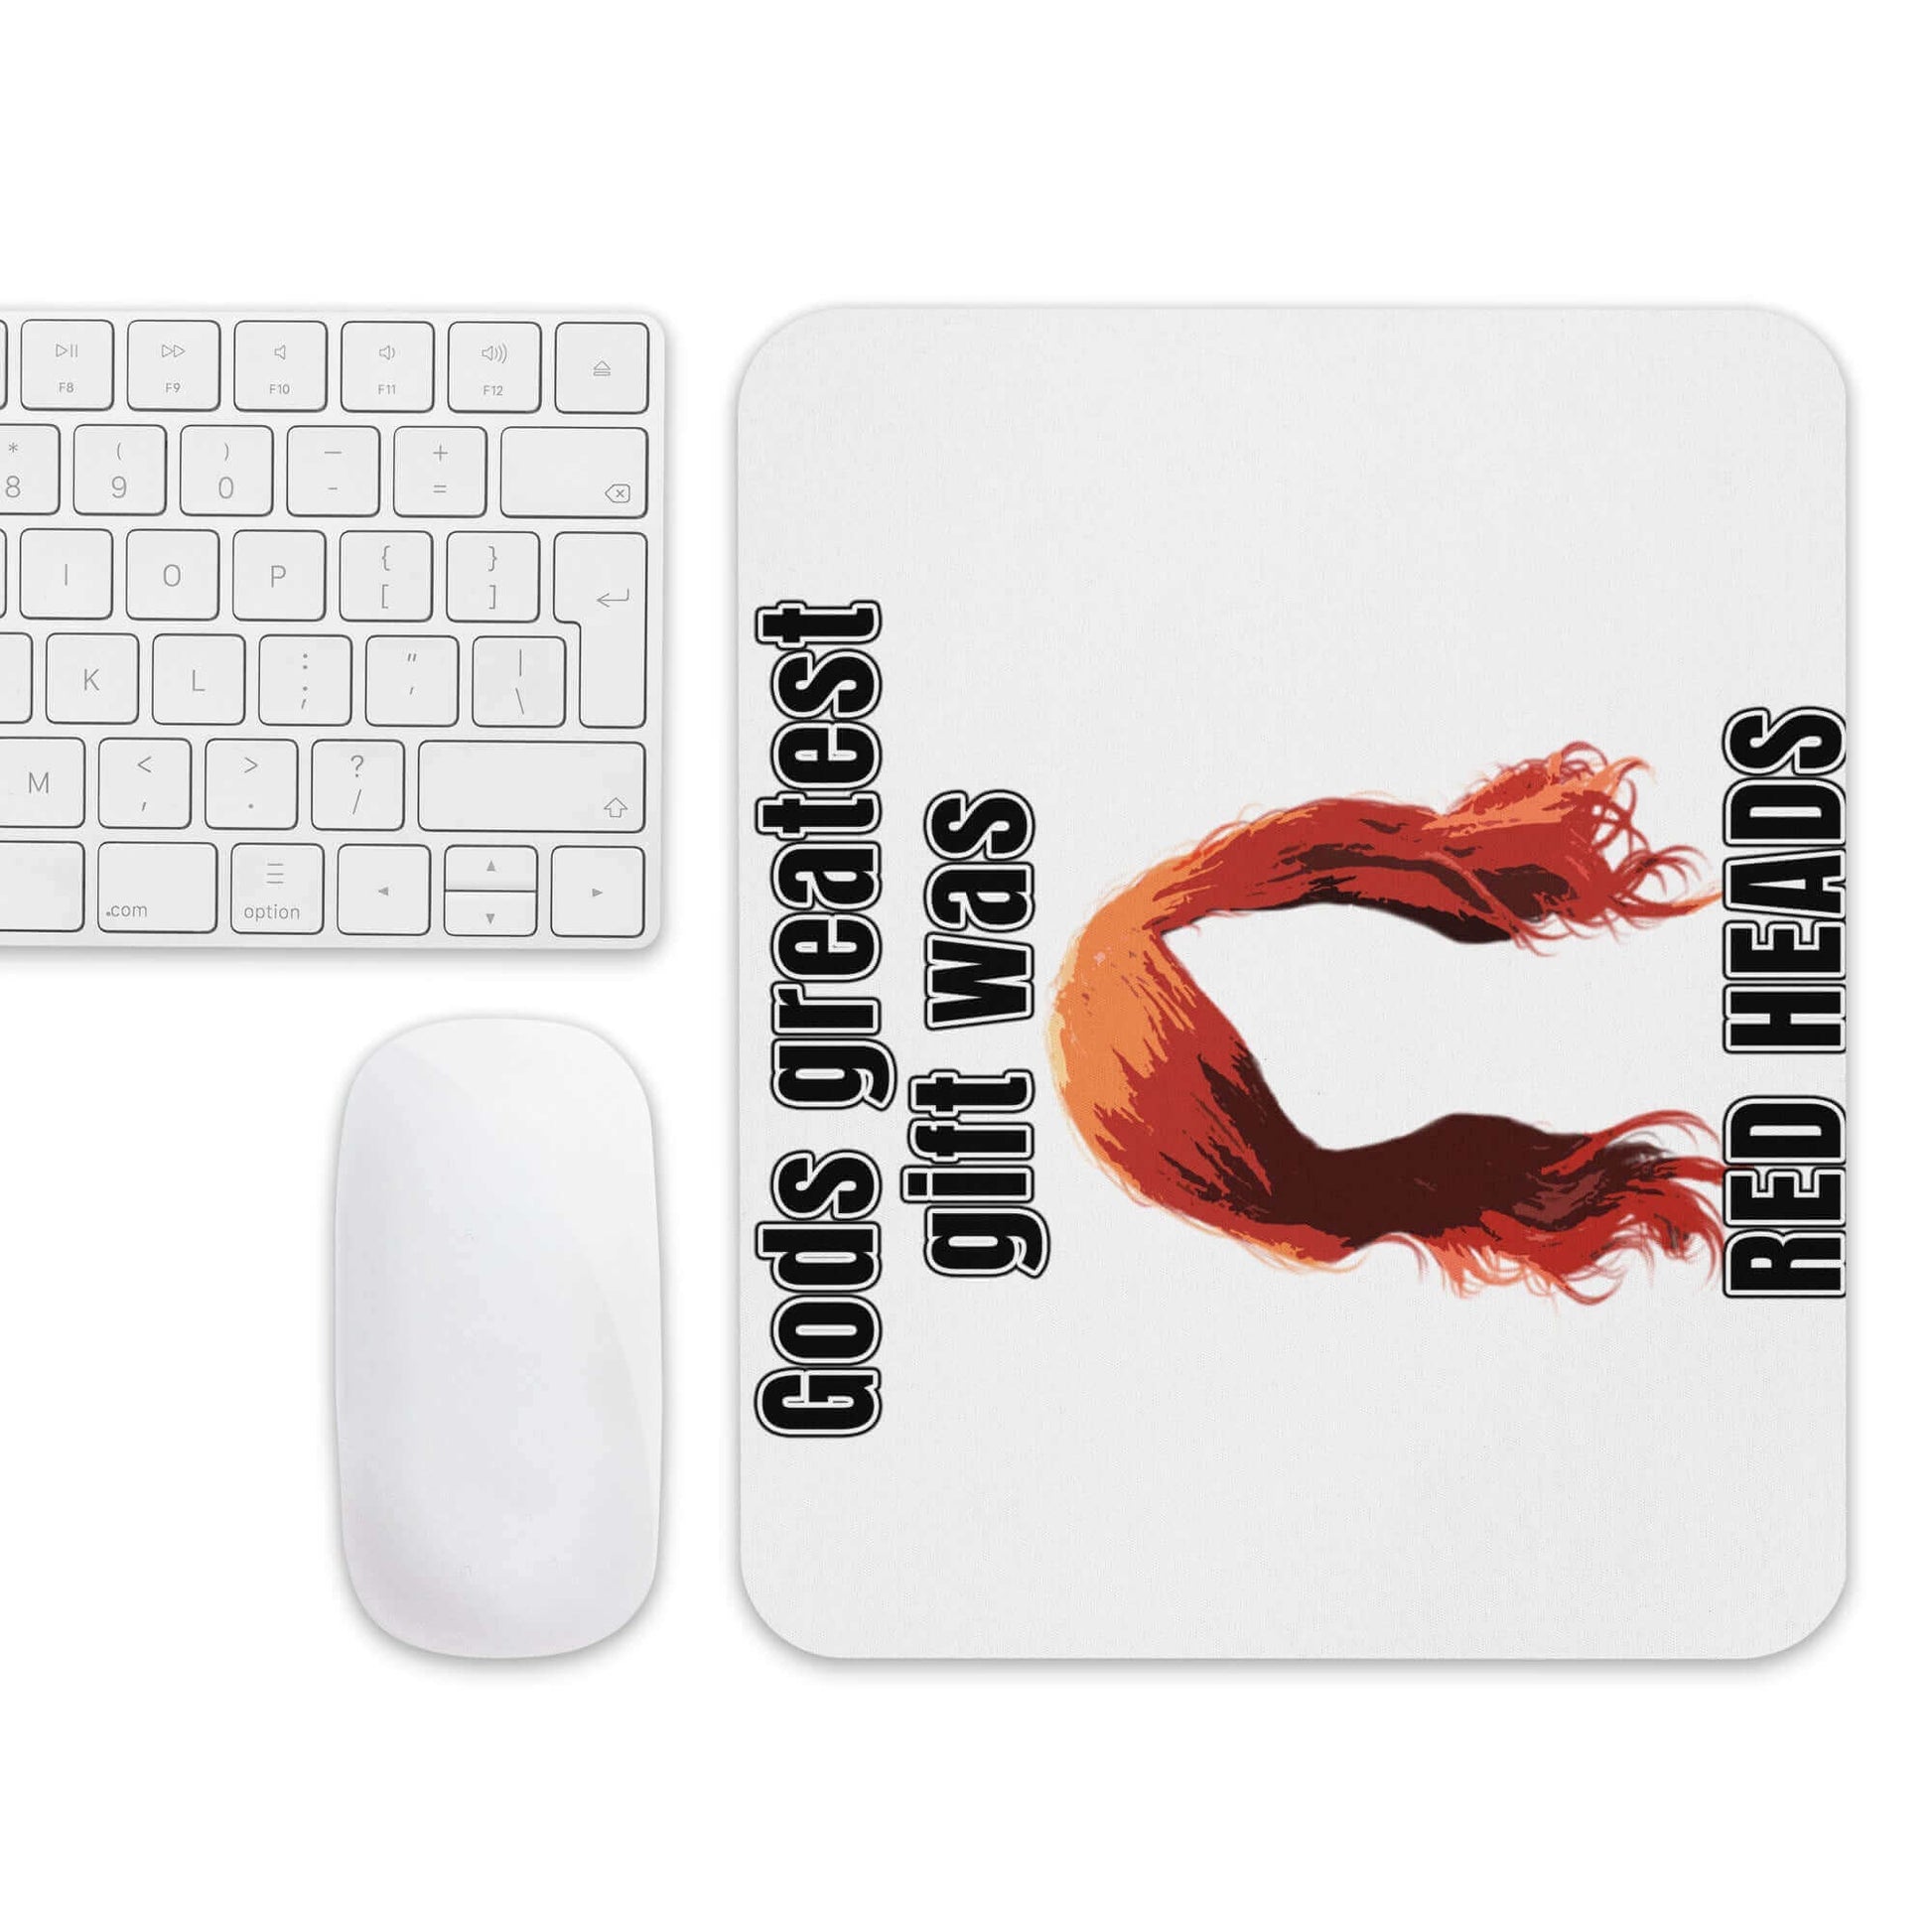 Gods greatest gift was RED HEADS - Mouse pad anniversary best lay christmas drapes match the curtains gift for mom gift for sister gift for wife giger god holiday no soul red head